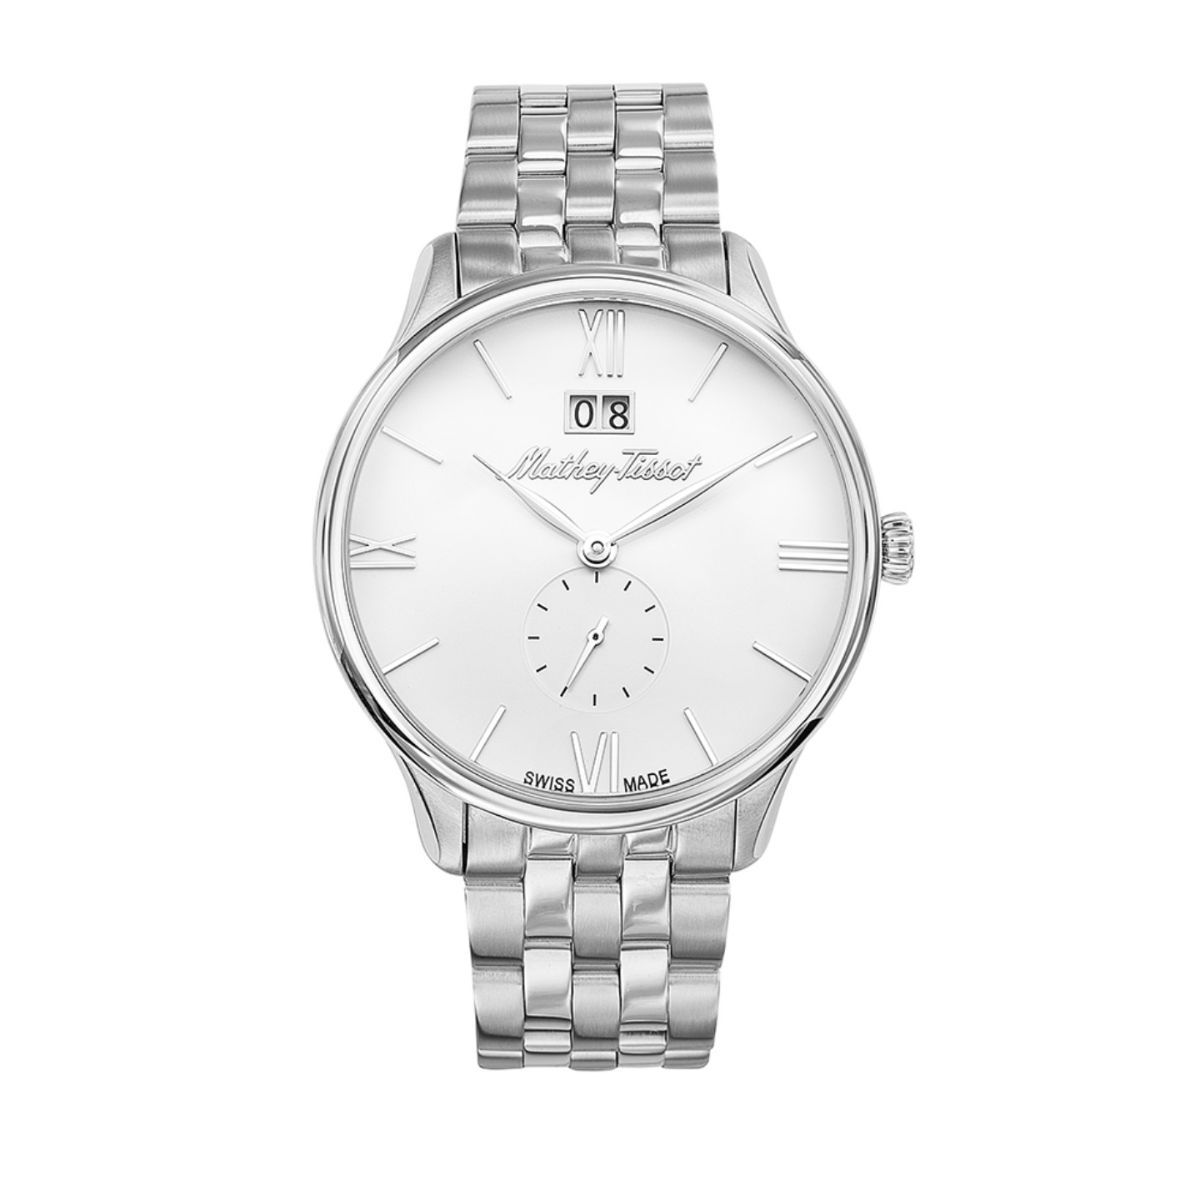 Mathey-Tissot White Dial Analogue Watches For Men - H1886MAI